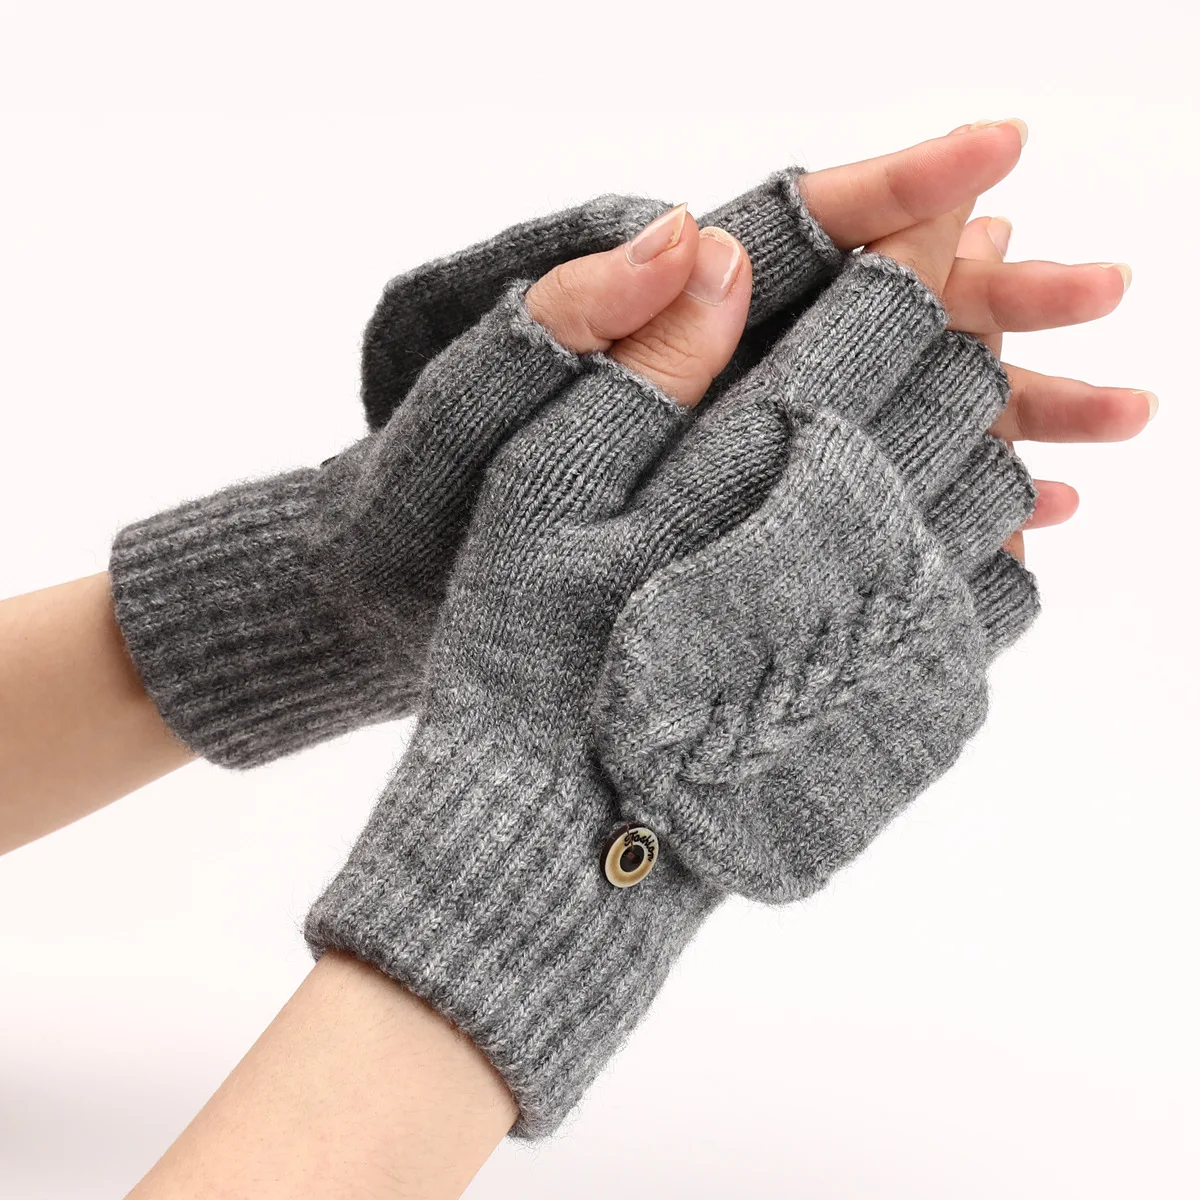 

Unisex Winter Knitted Convertible Fingerless Gloves Solid Color Warm Woolen Mittens Glove With Flap Cover for Women Men